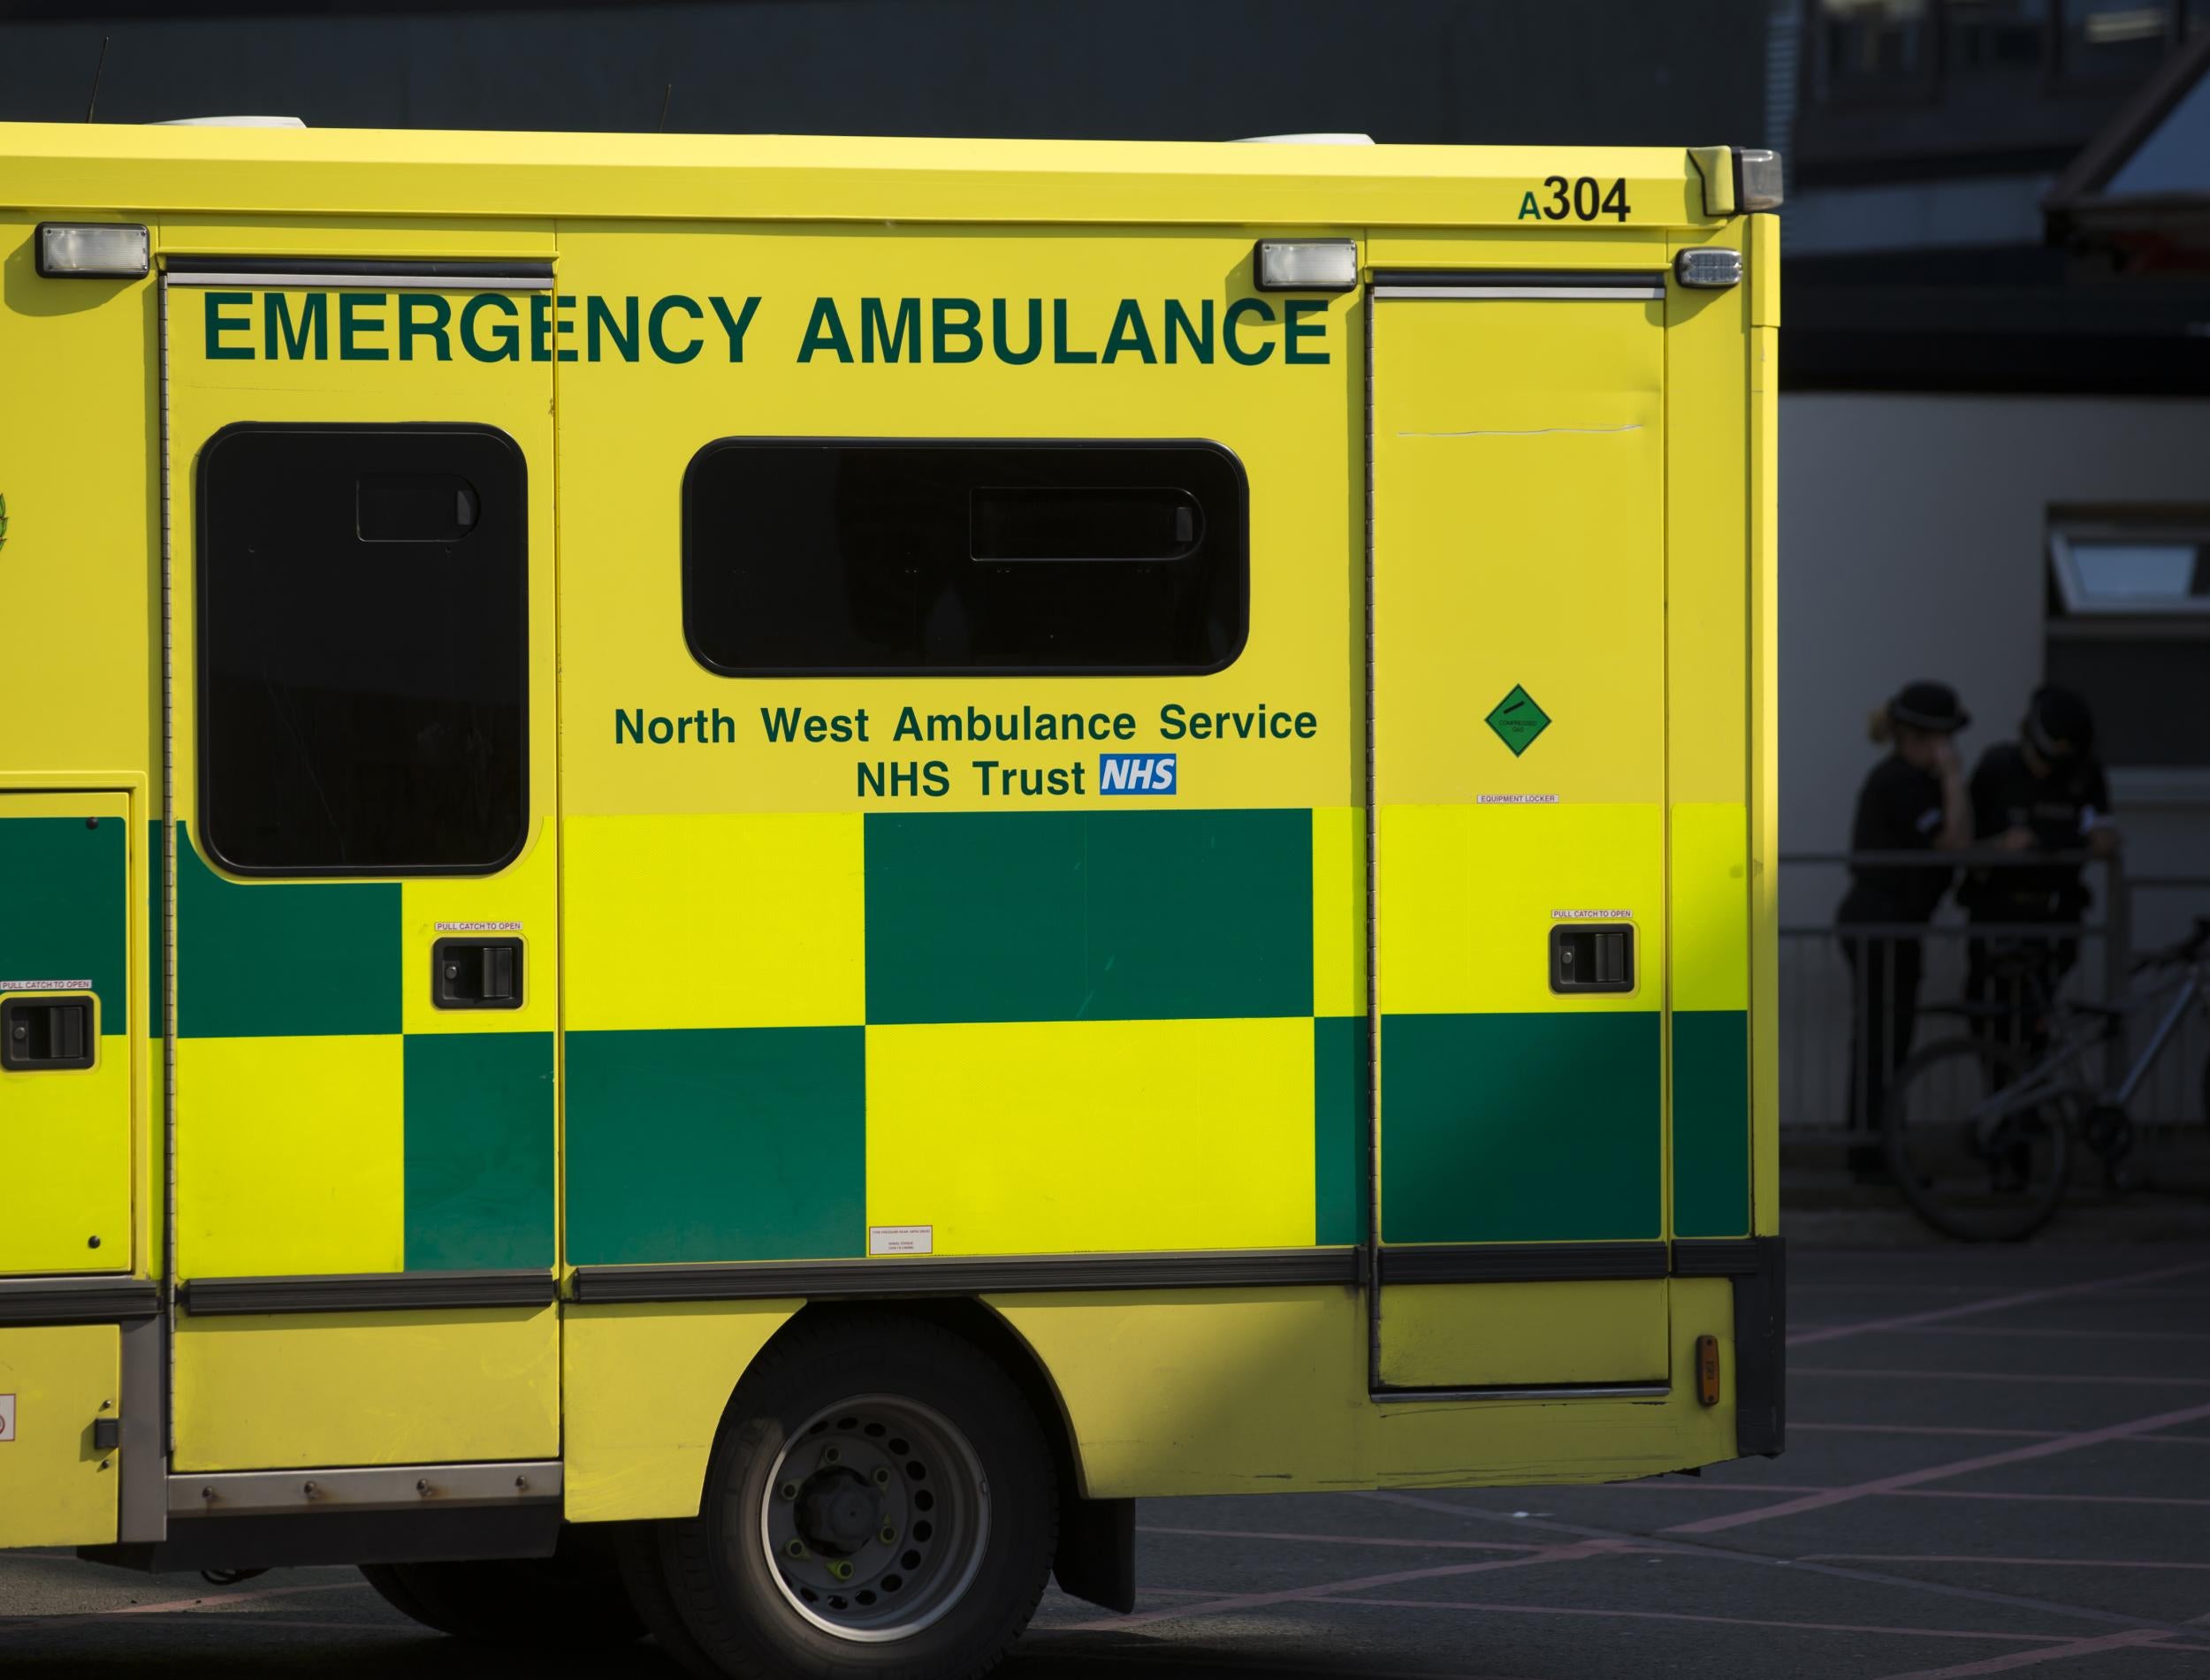 An ambulance is seen at the Manchester Royal Infirmary Hospital in Manchester, northwest England, on May 25, 2017 where some of the injured victims of the May 22 Terror attack at the Manchester Arena are being cared for